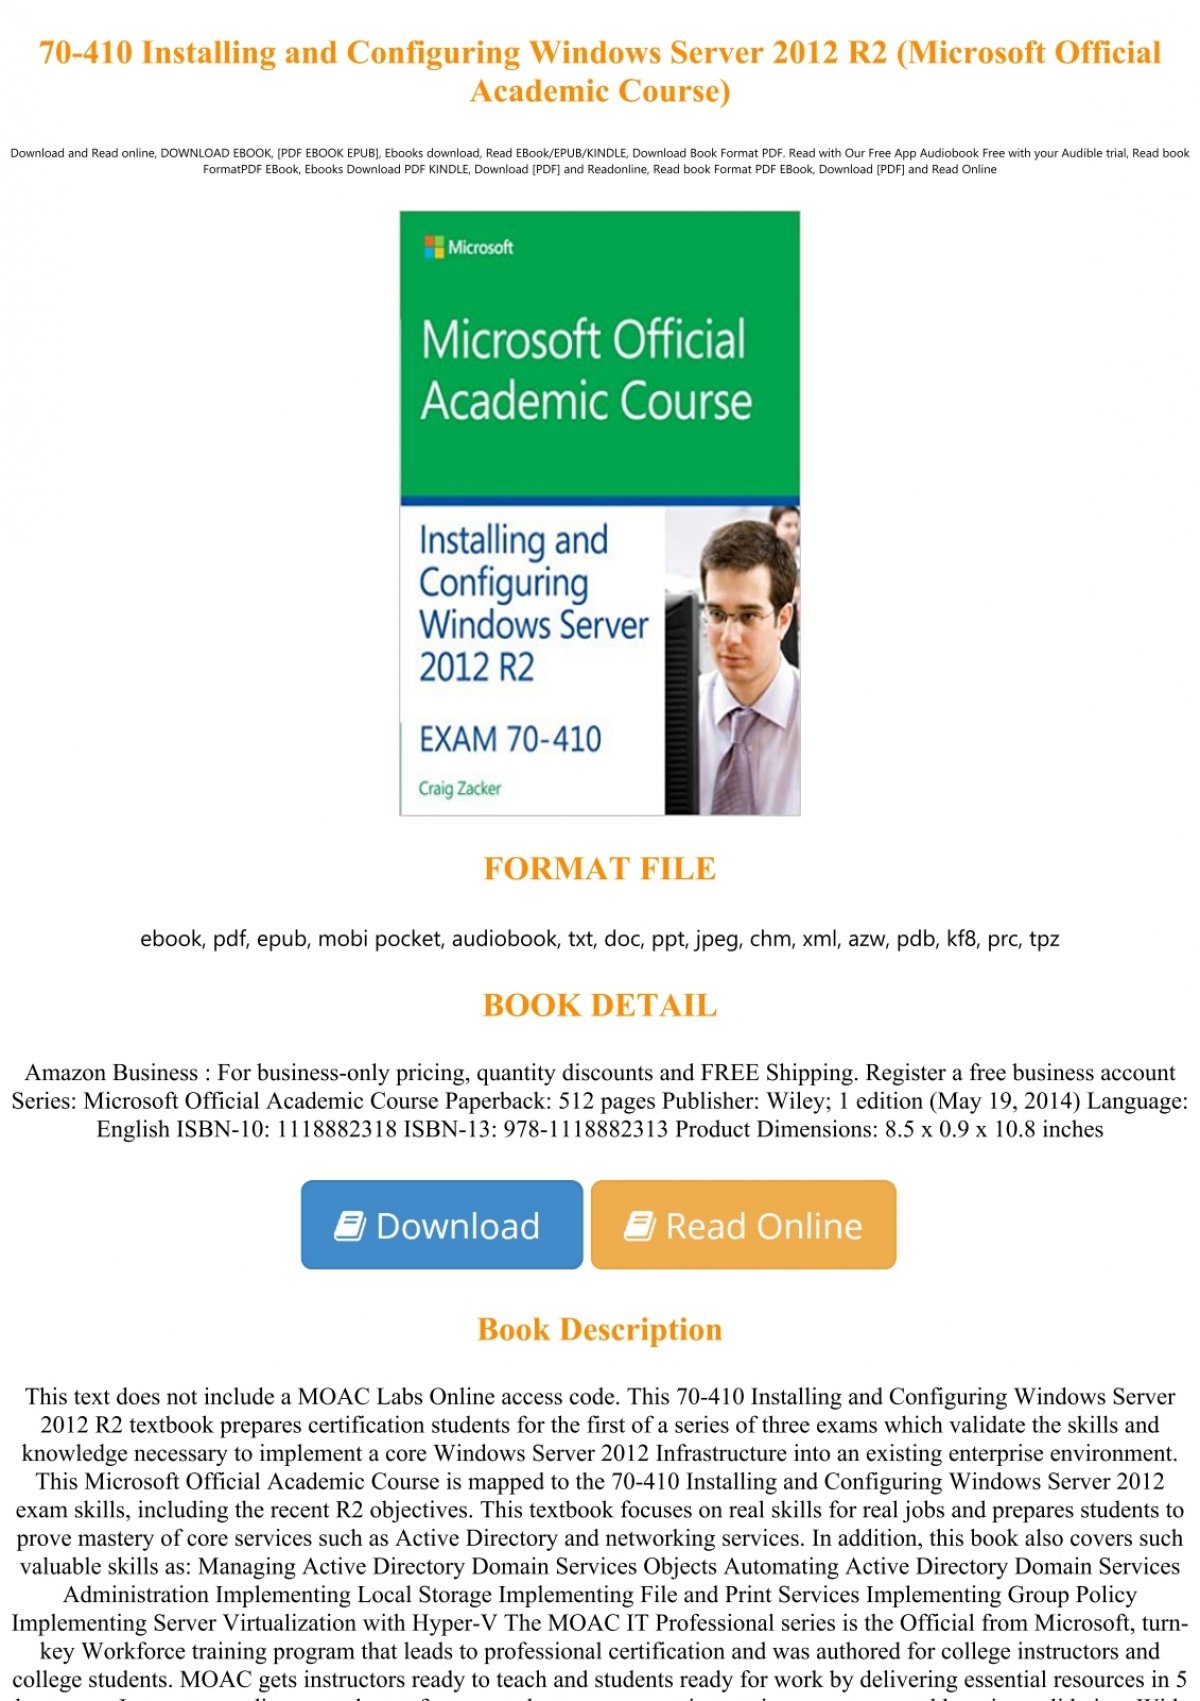 Pdf Download 70 410 Installing And Configuring Windows Server 2012 R2 Microsoft Official 7801